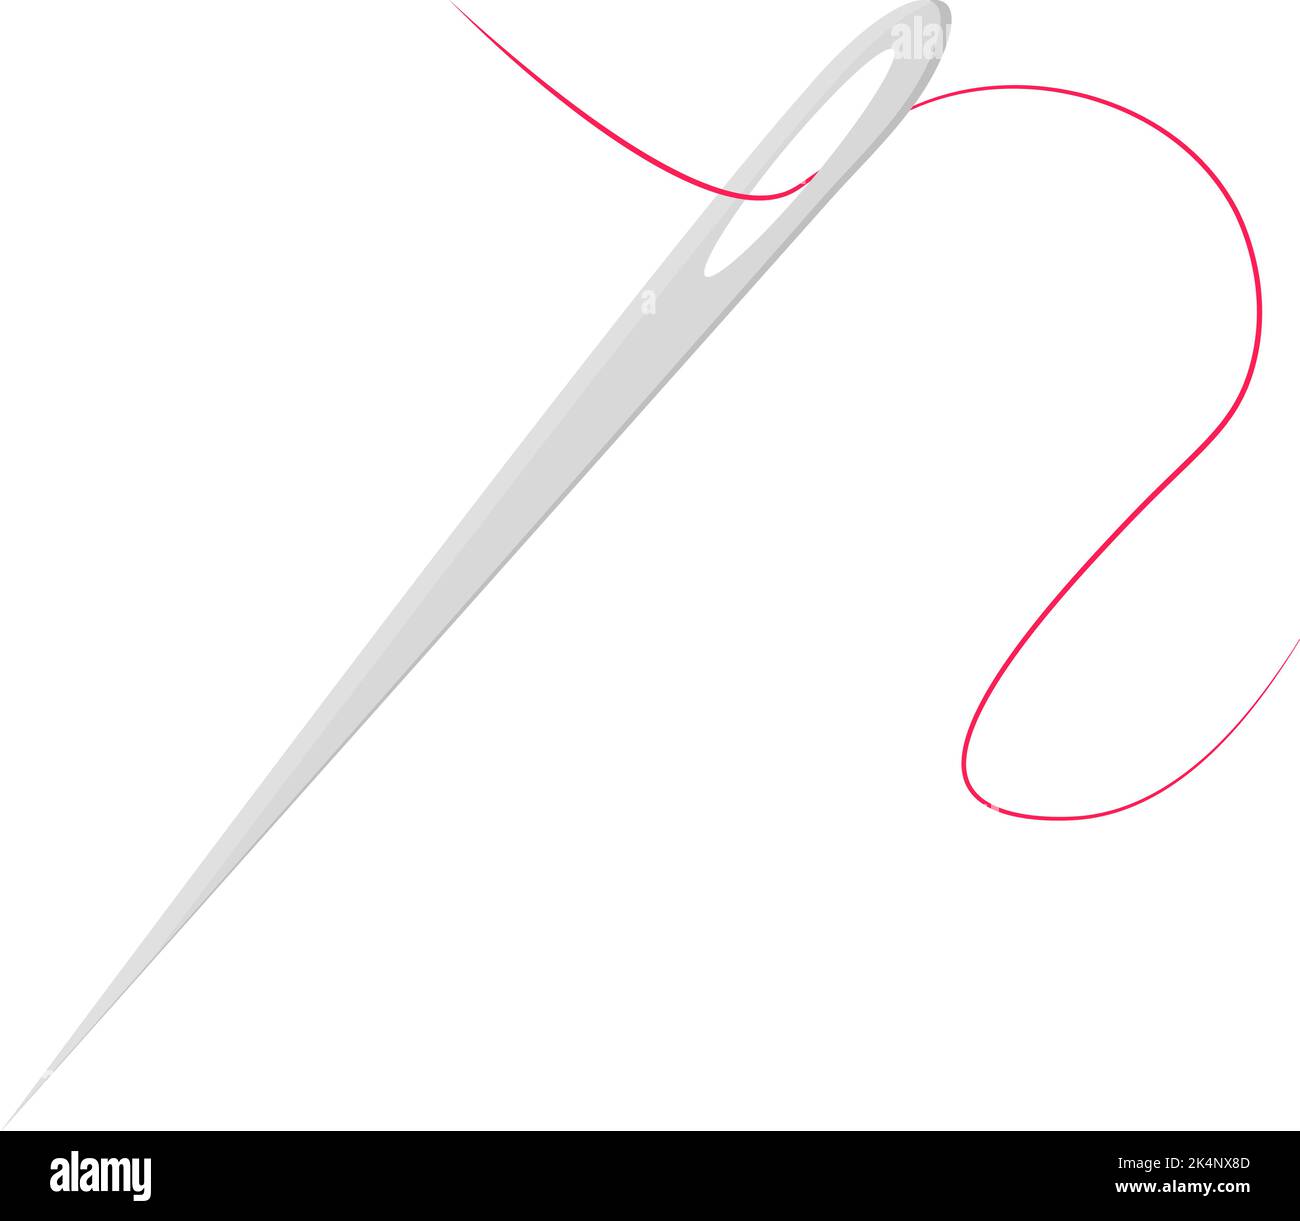 https://c8.alamy.com/comp/2K4NX8D/sewing-needle-with-thread-illustration-vector-on-a-white-background-2K4NX8D.jpg